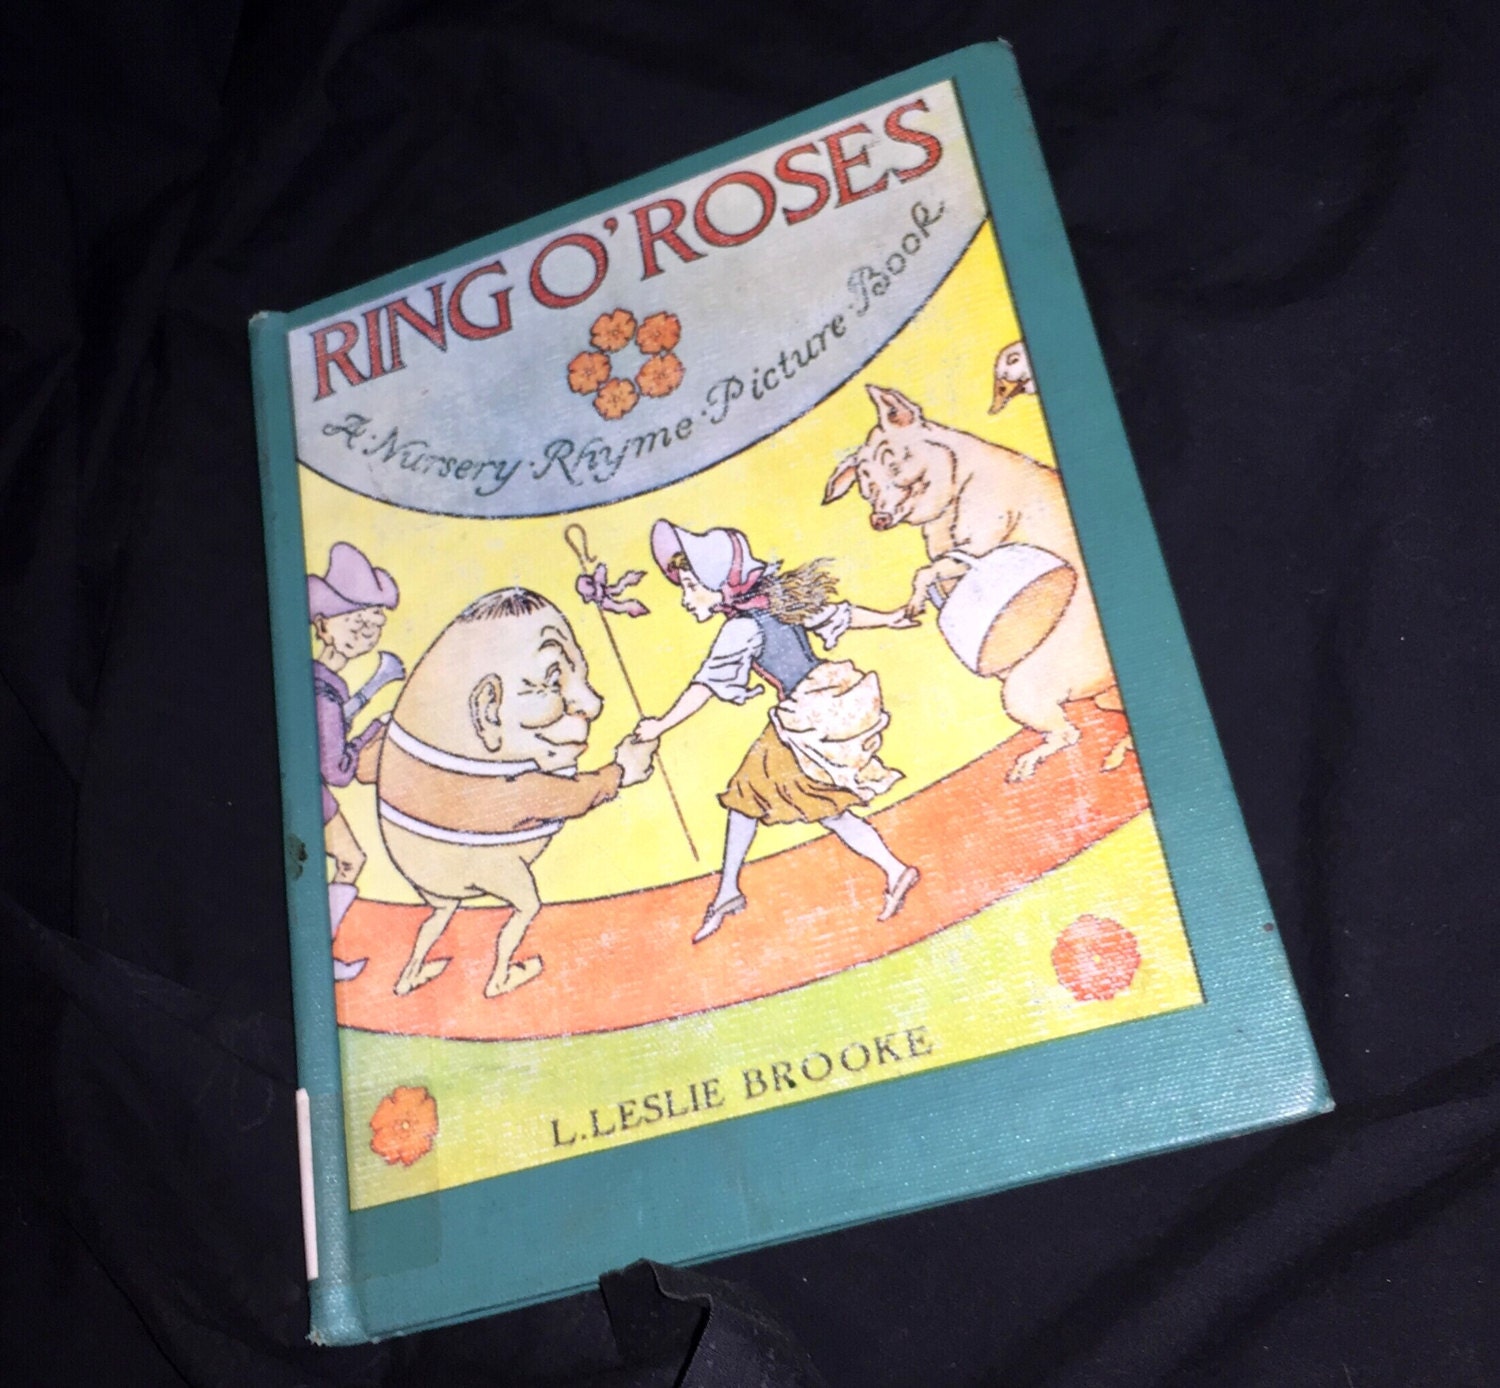 Ring A-Ring O' Roses - English Children's Songs - England - Mama Lisa's  World: Children's Songs and Rhymes from Around the World